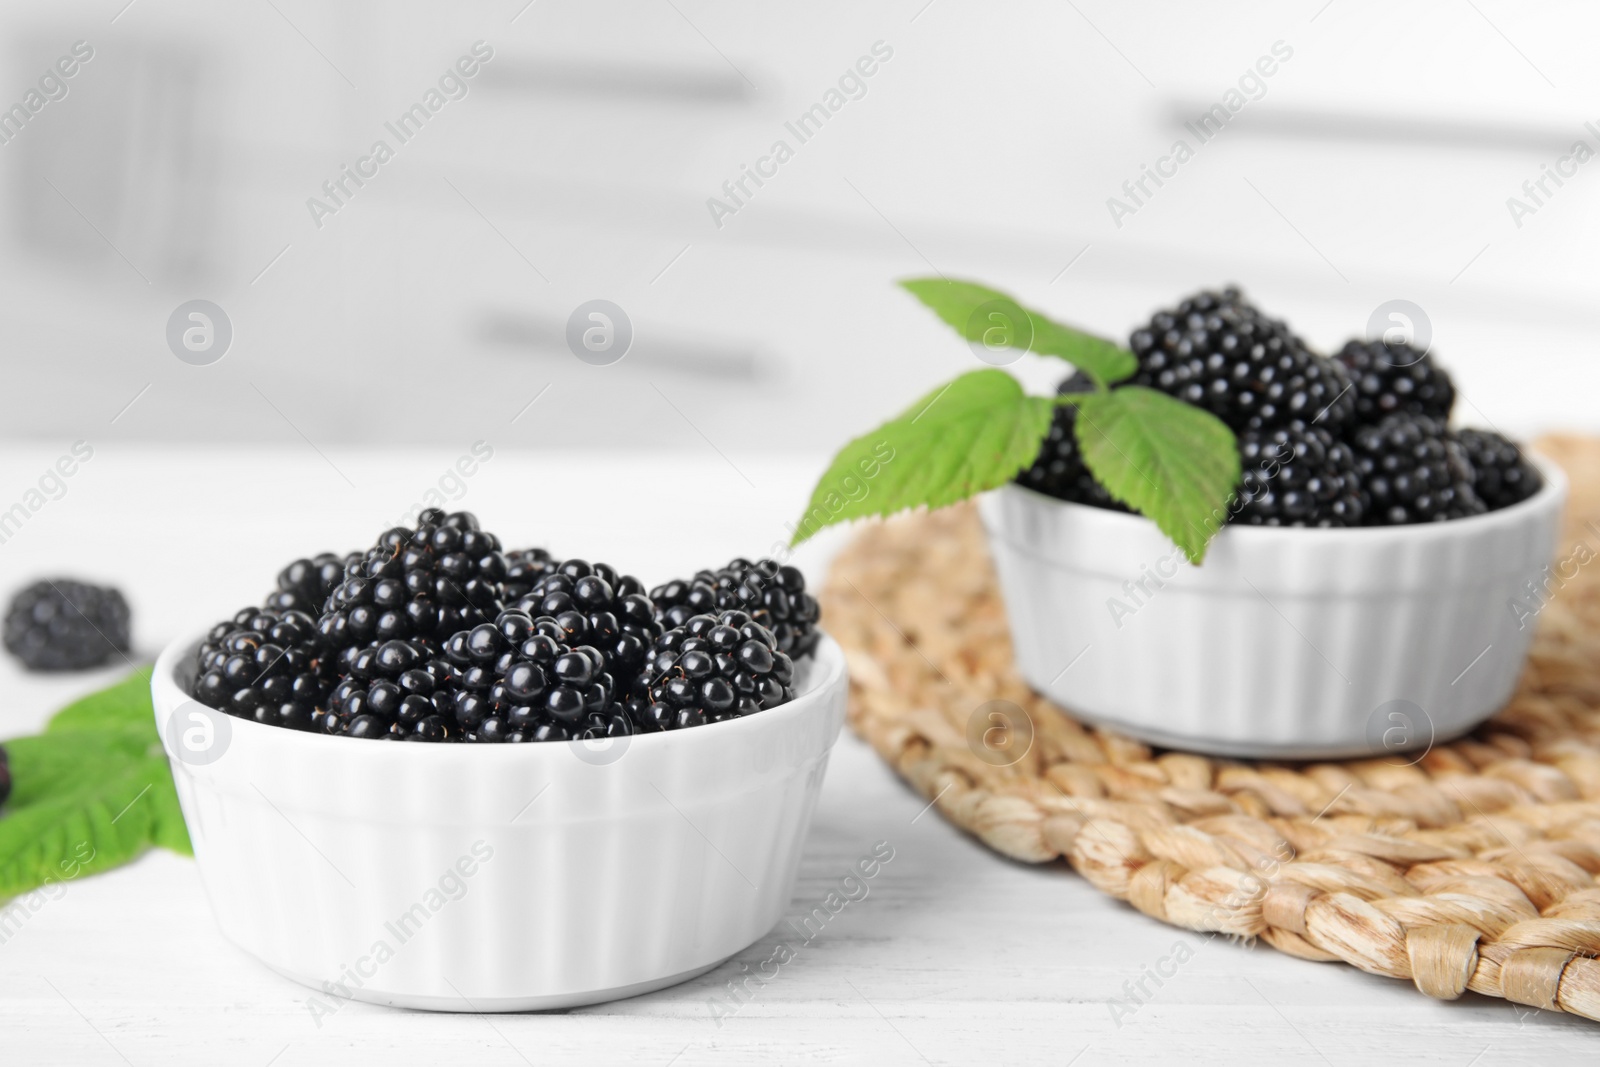 Photo of Bowls of tasty blackberries with leaves on white wooden table